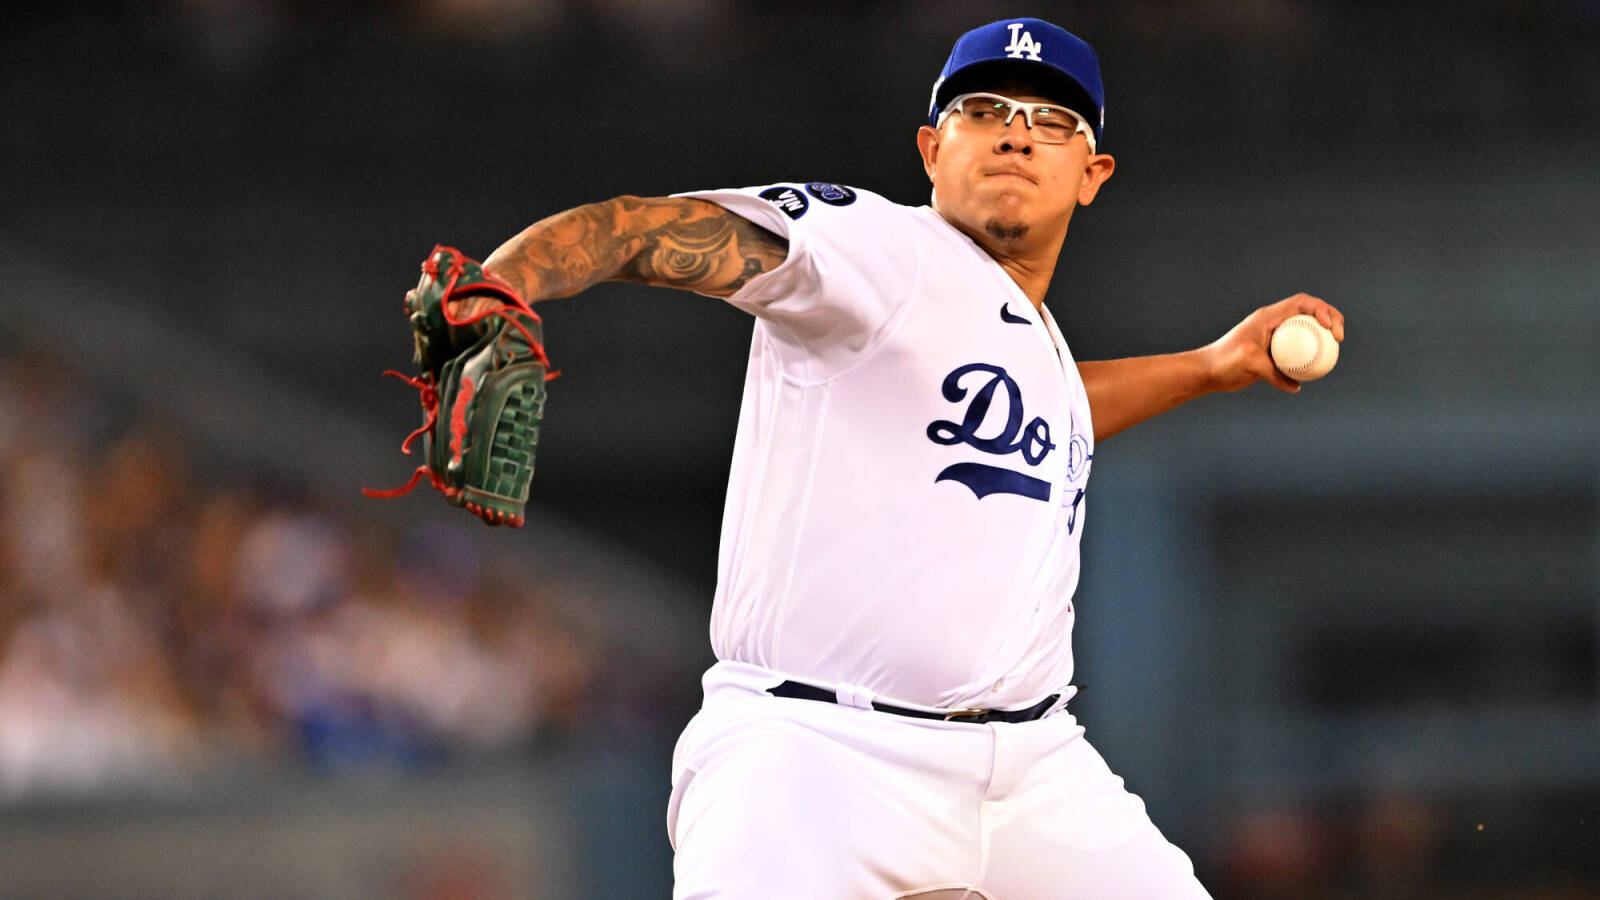 Julio Urias looks to add to his impressive resume in 2023